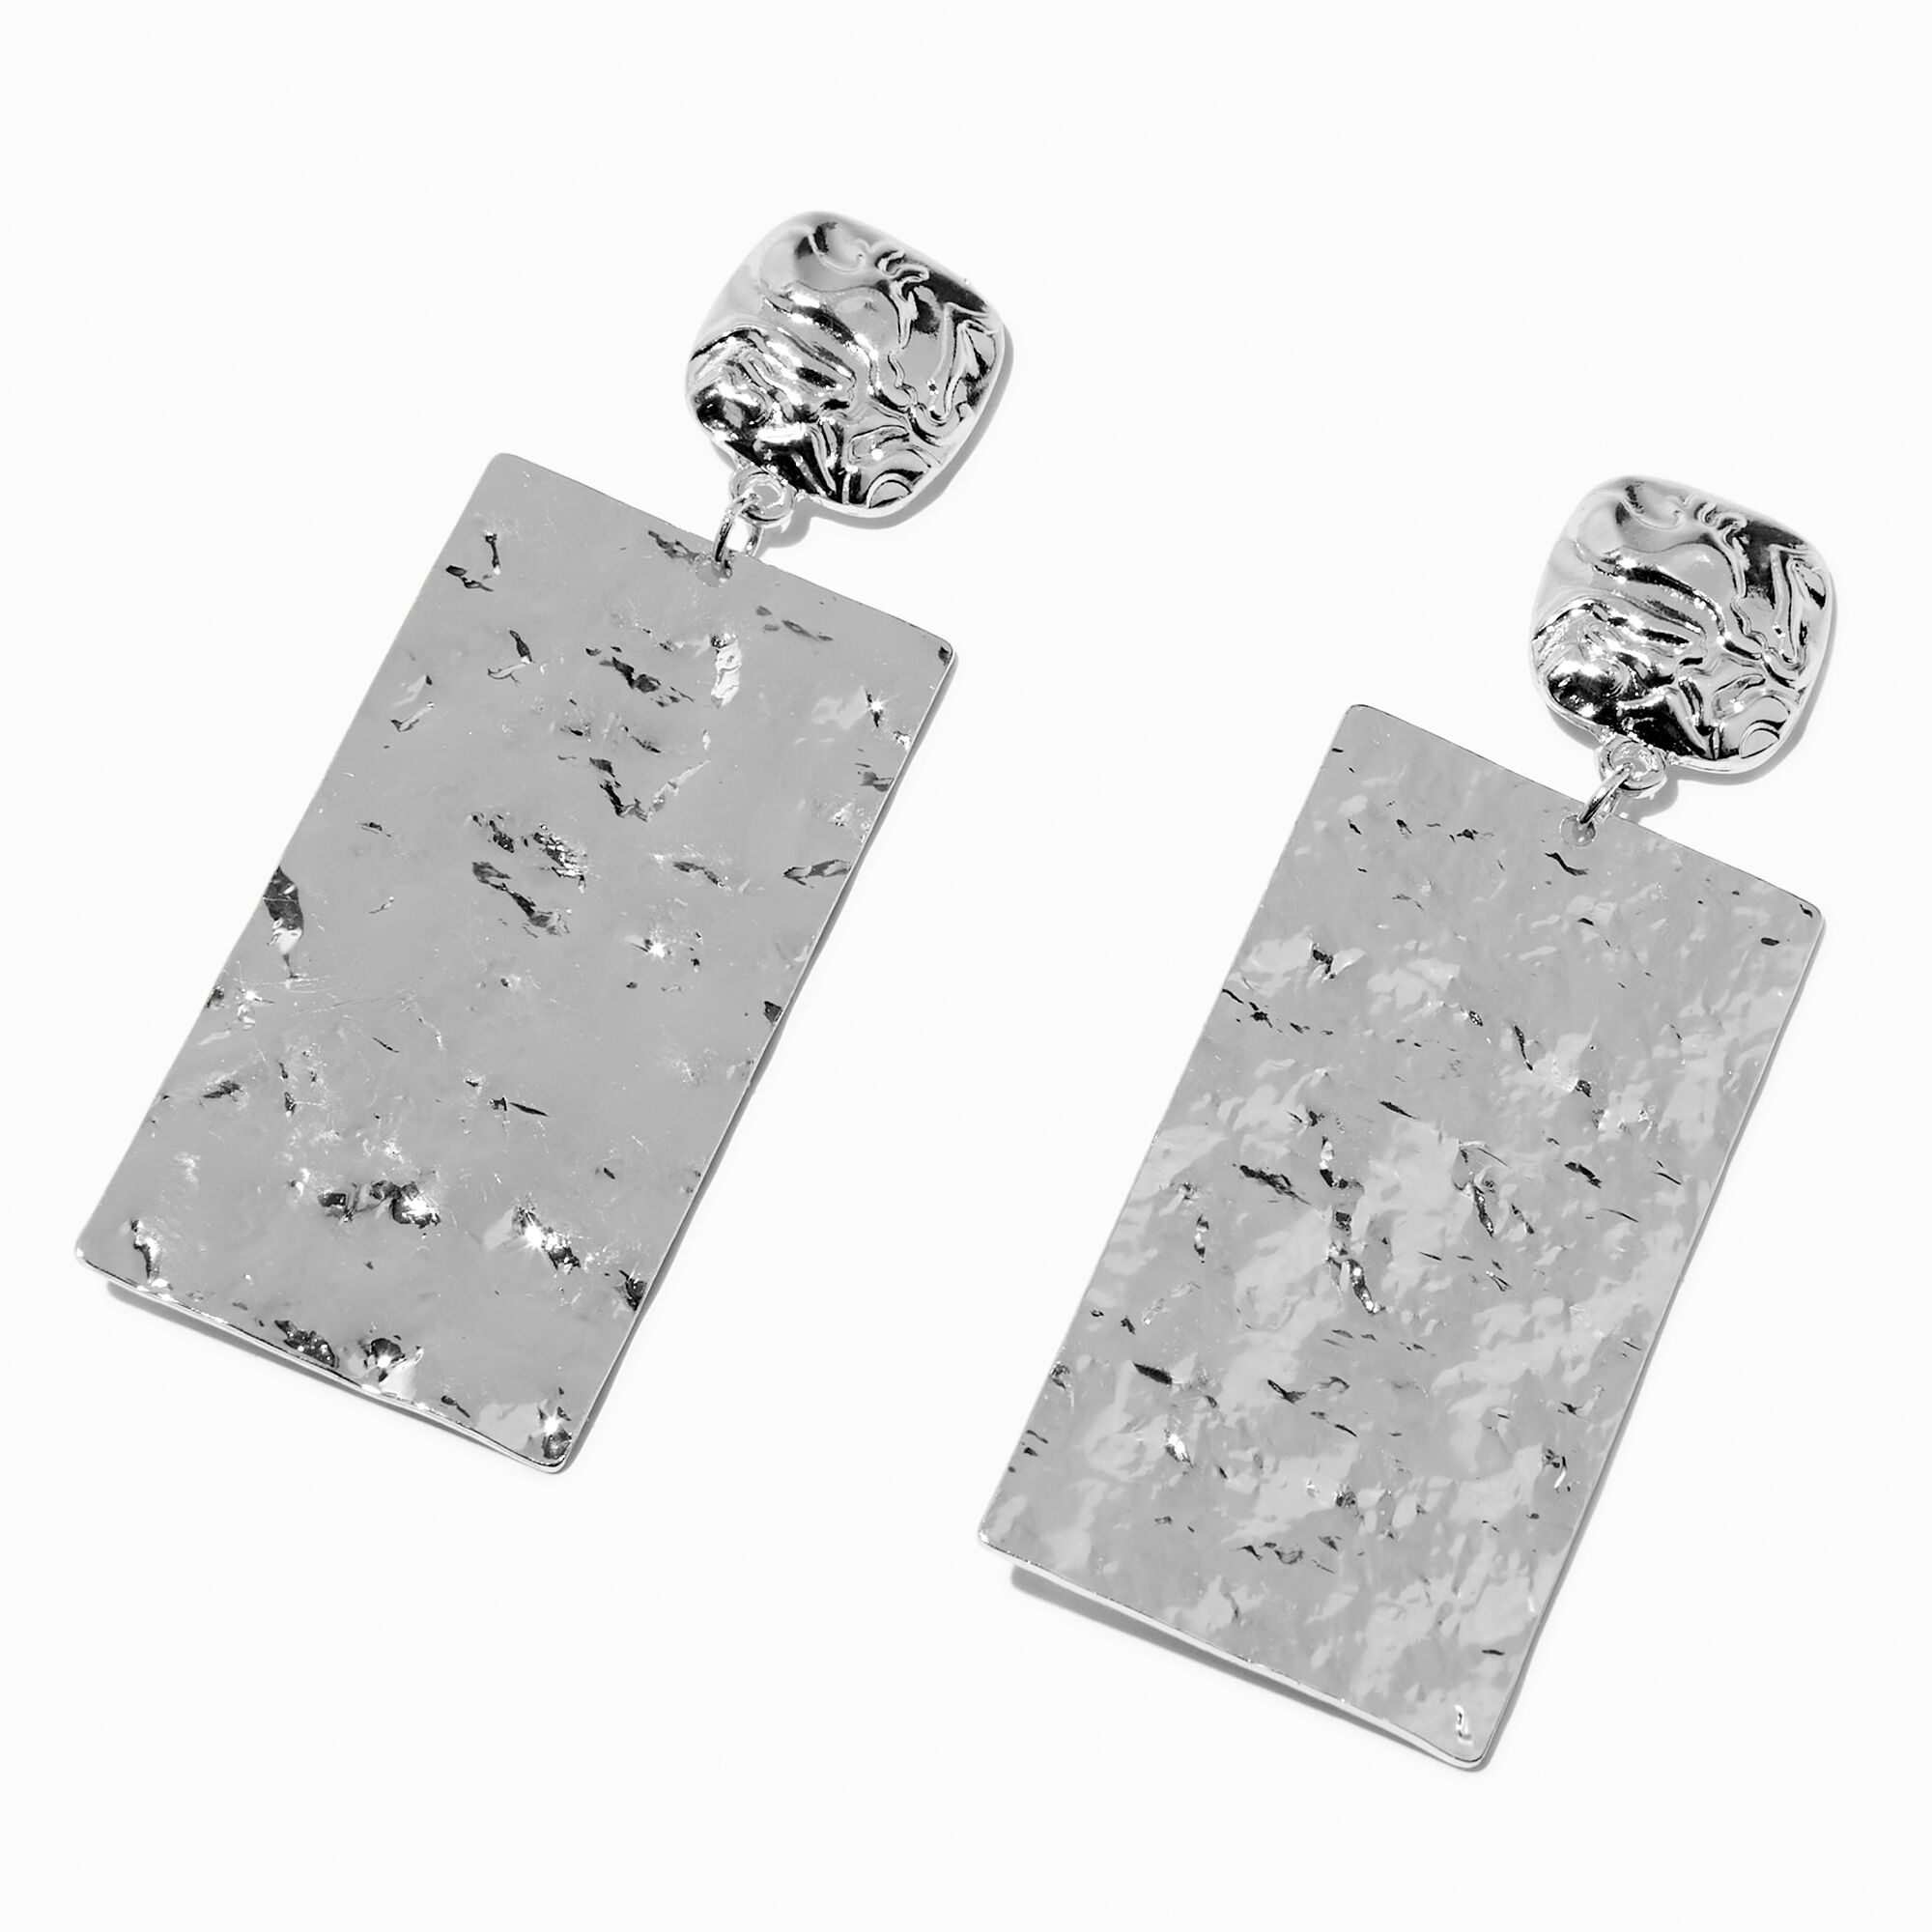 View Claires Tone Hammered Rectangular 3 Drop Earrings Silver information